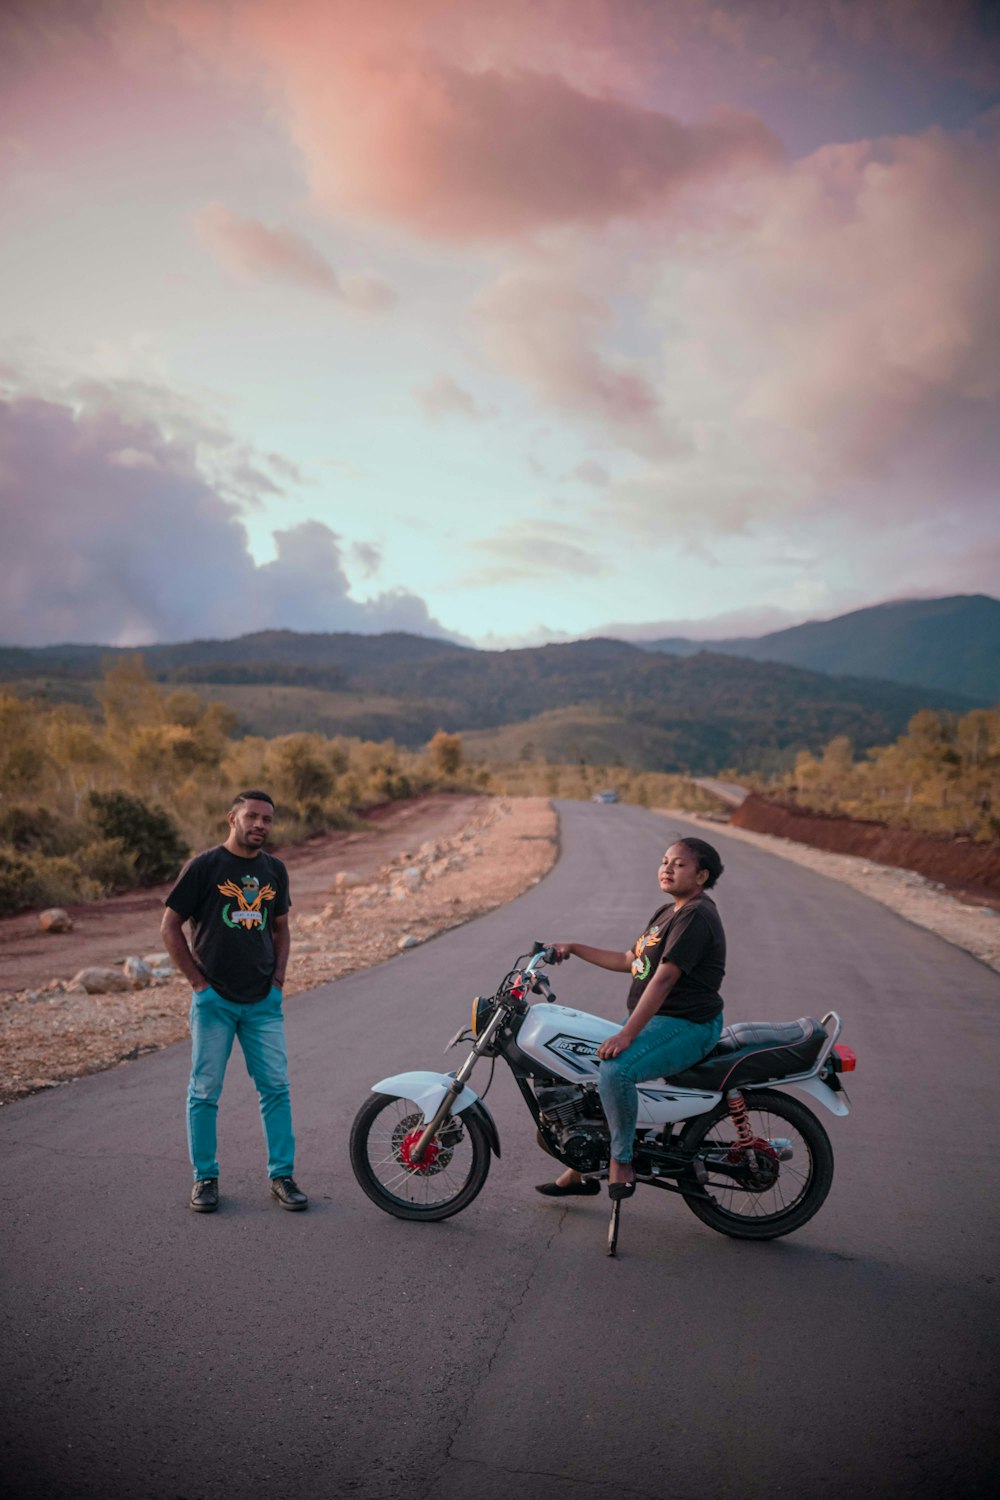 two men standing next to a motorcycle on a road